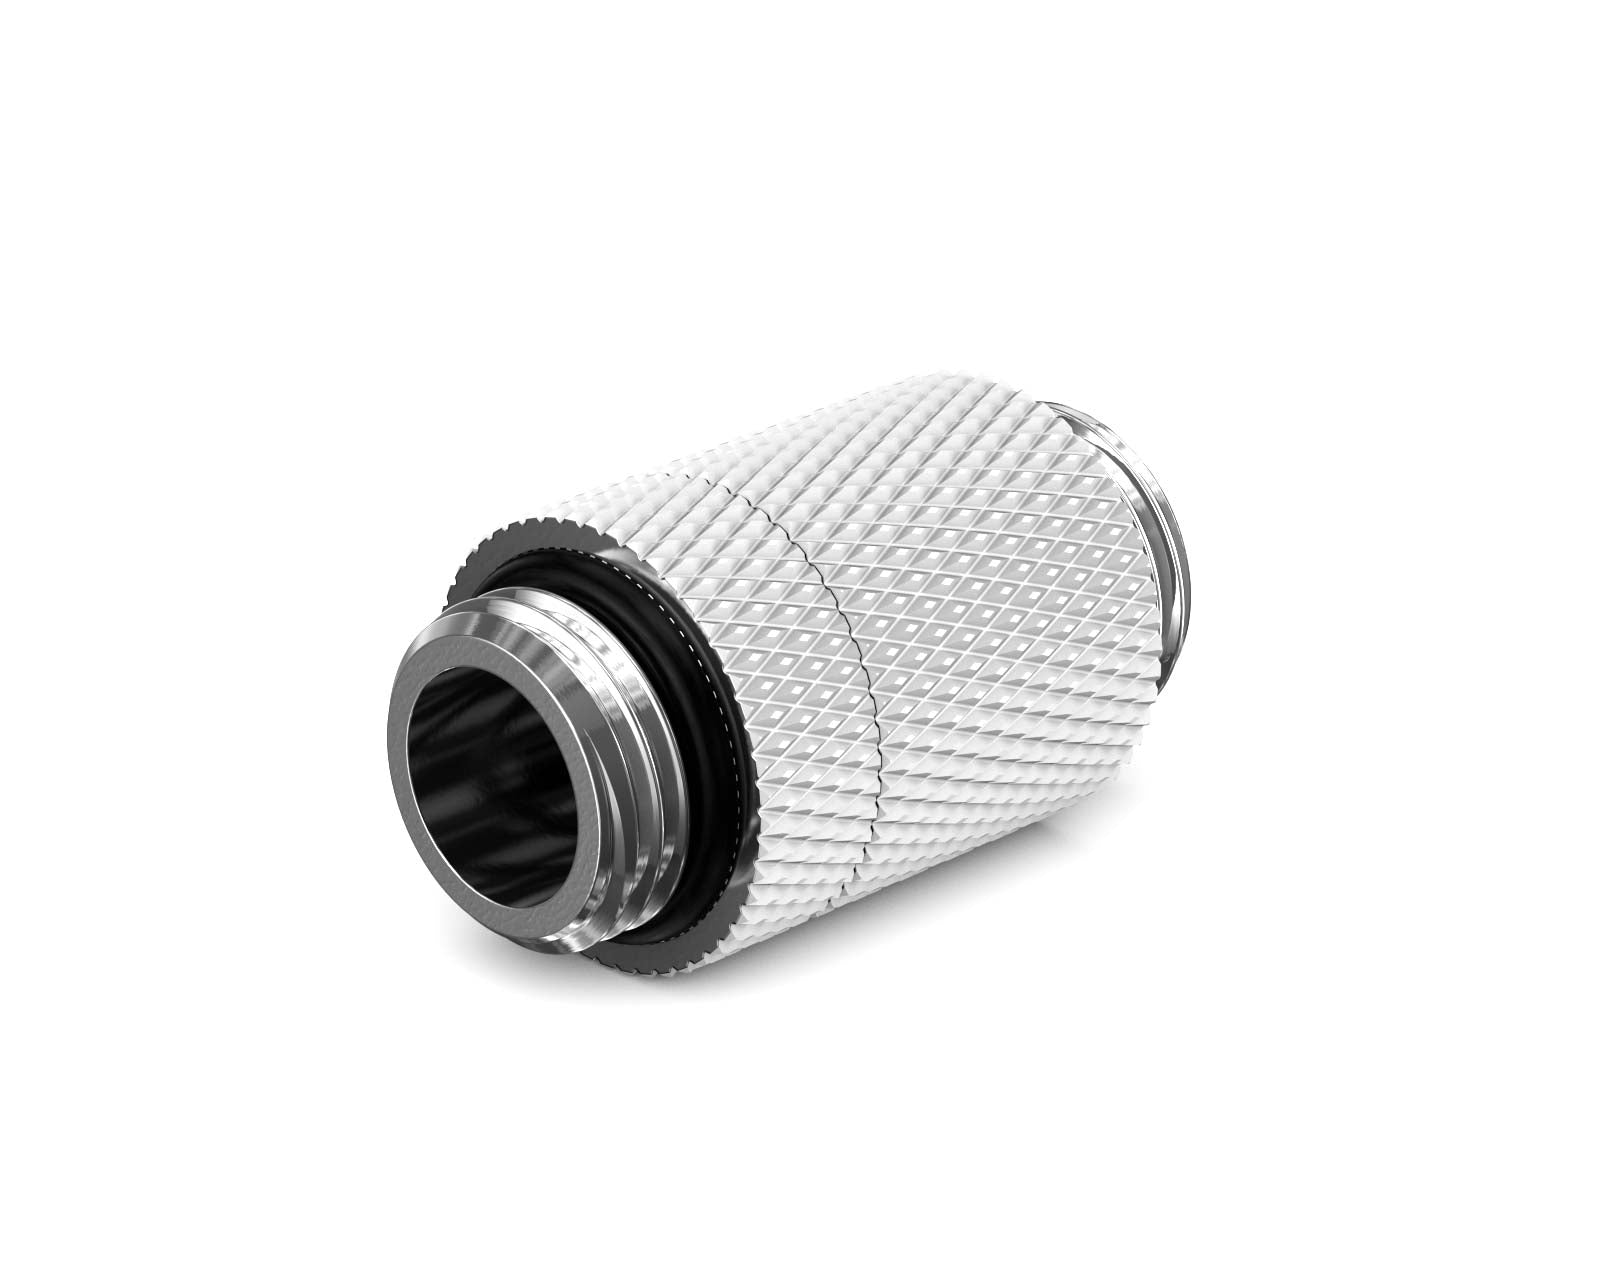 BSTOCK:PrimoChill Dual Male G 1/4in. SX Rotary Extension Coupler - Sky White